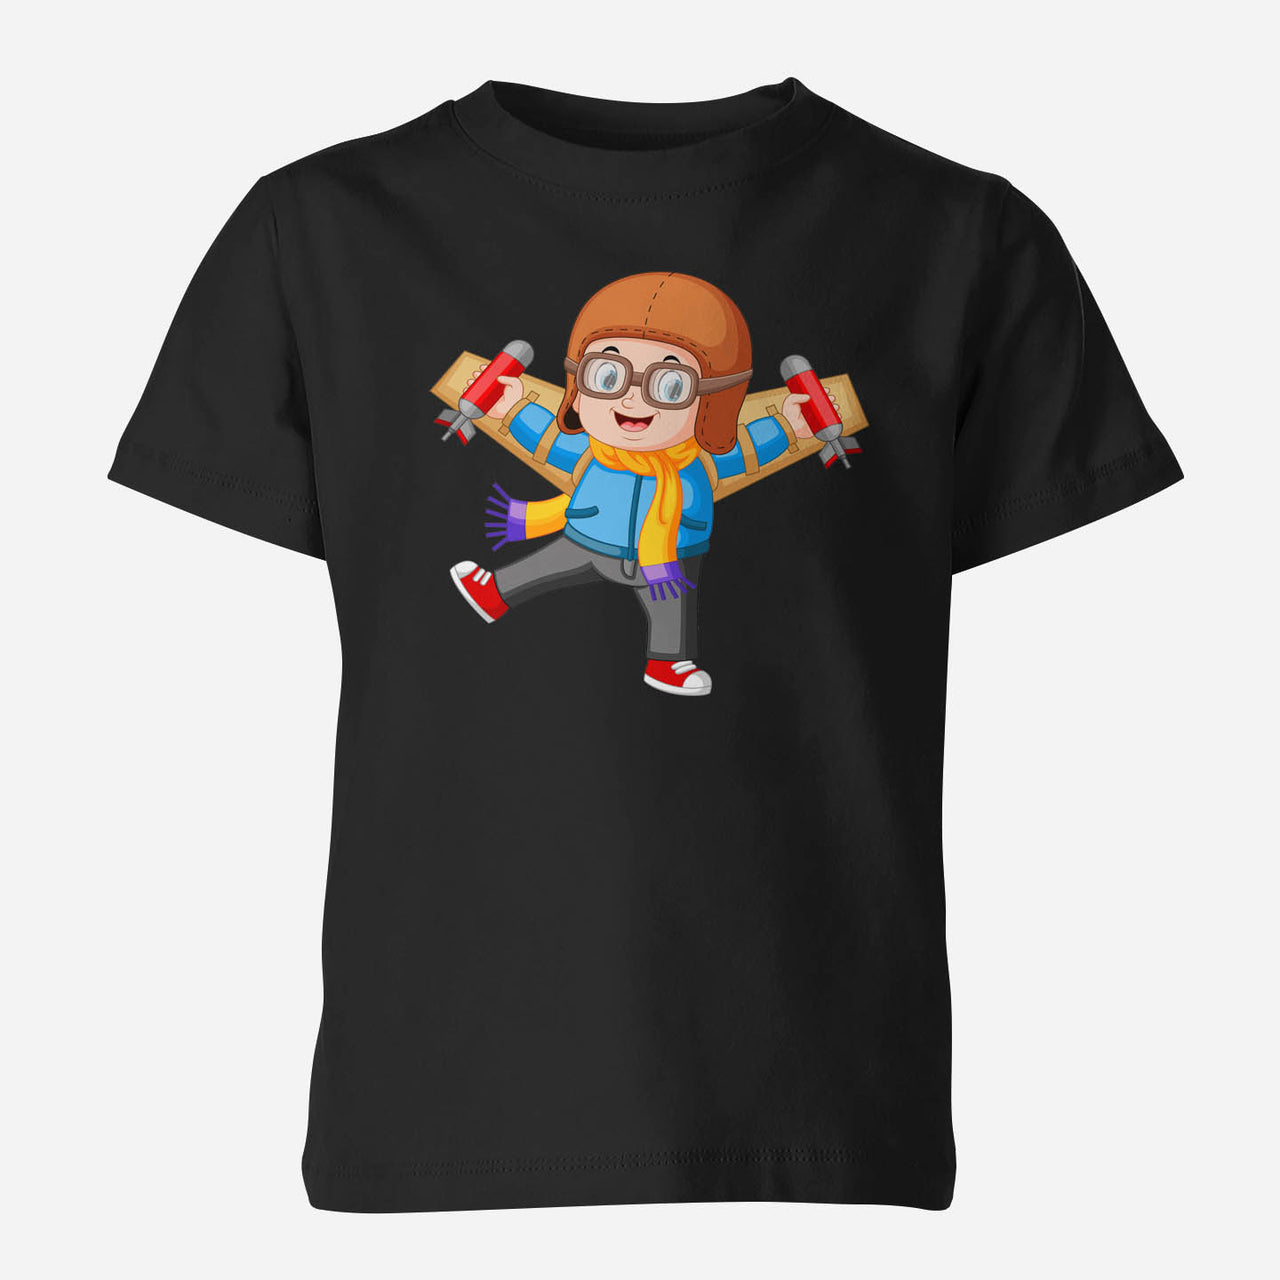 Cute Little Boy Pilot Costume Playing With Wings Children T-Shirts